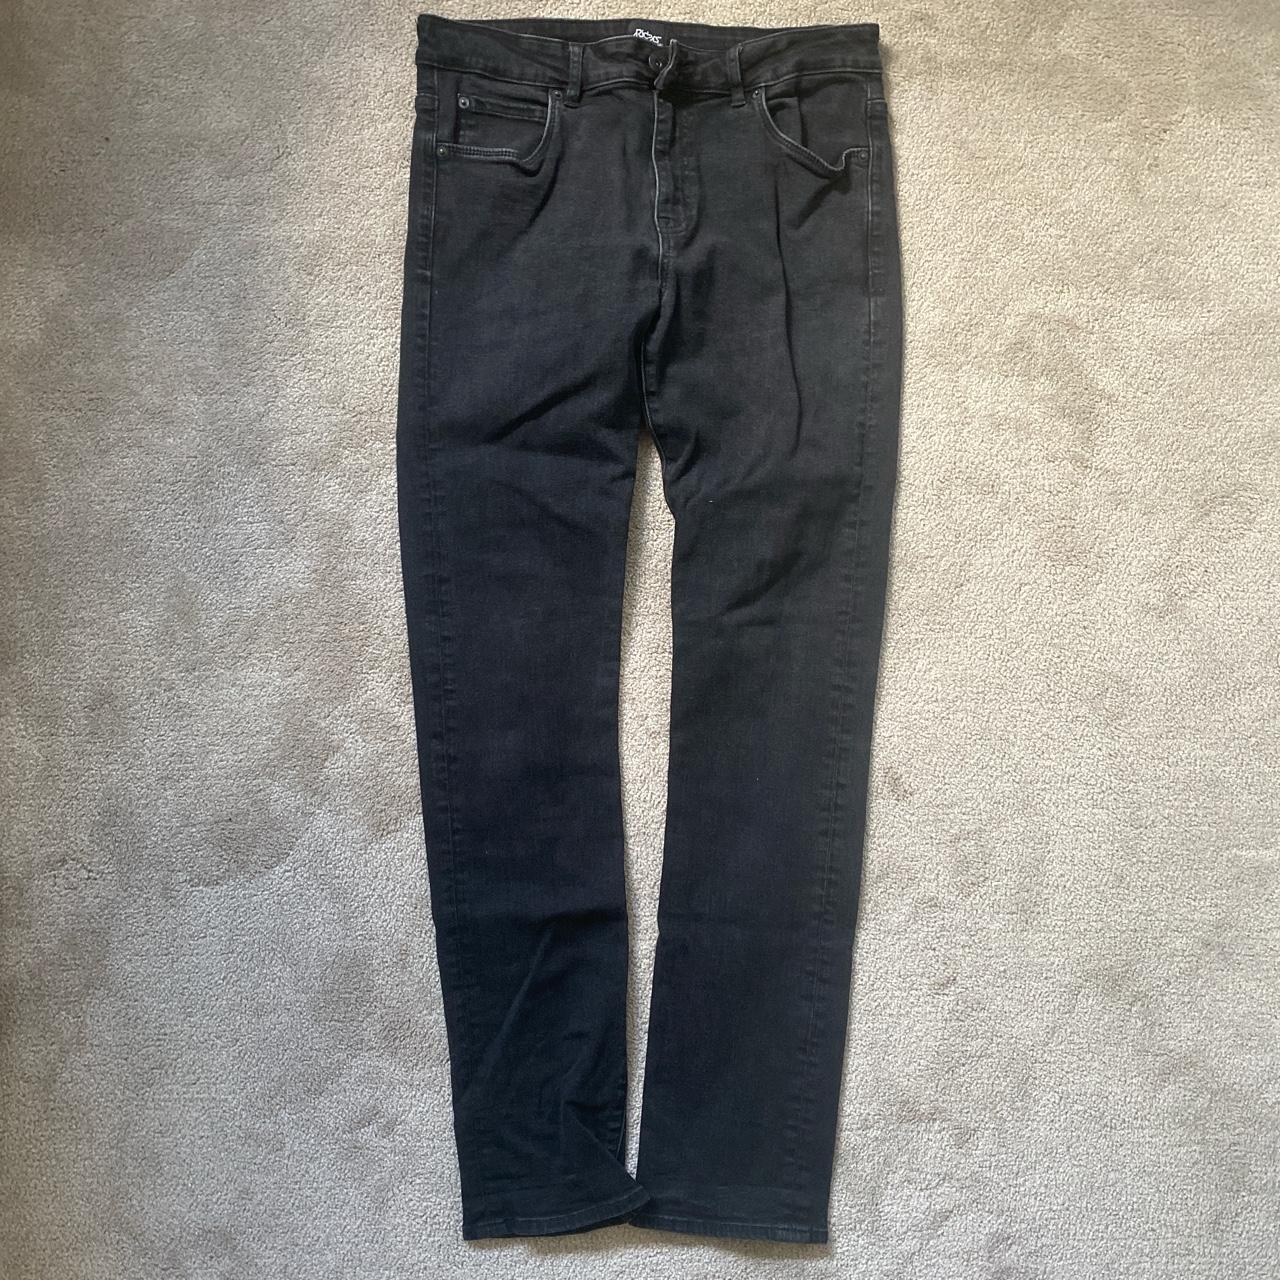 RIDERS - BLACK SKINNY JEANS SIZE / - Labelled as... - Depop